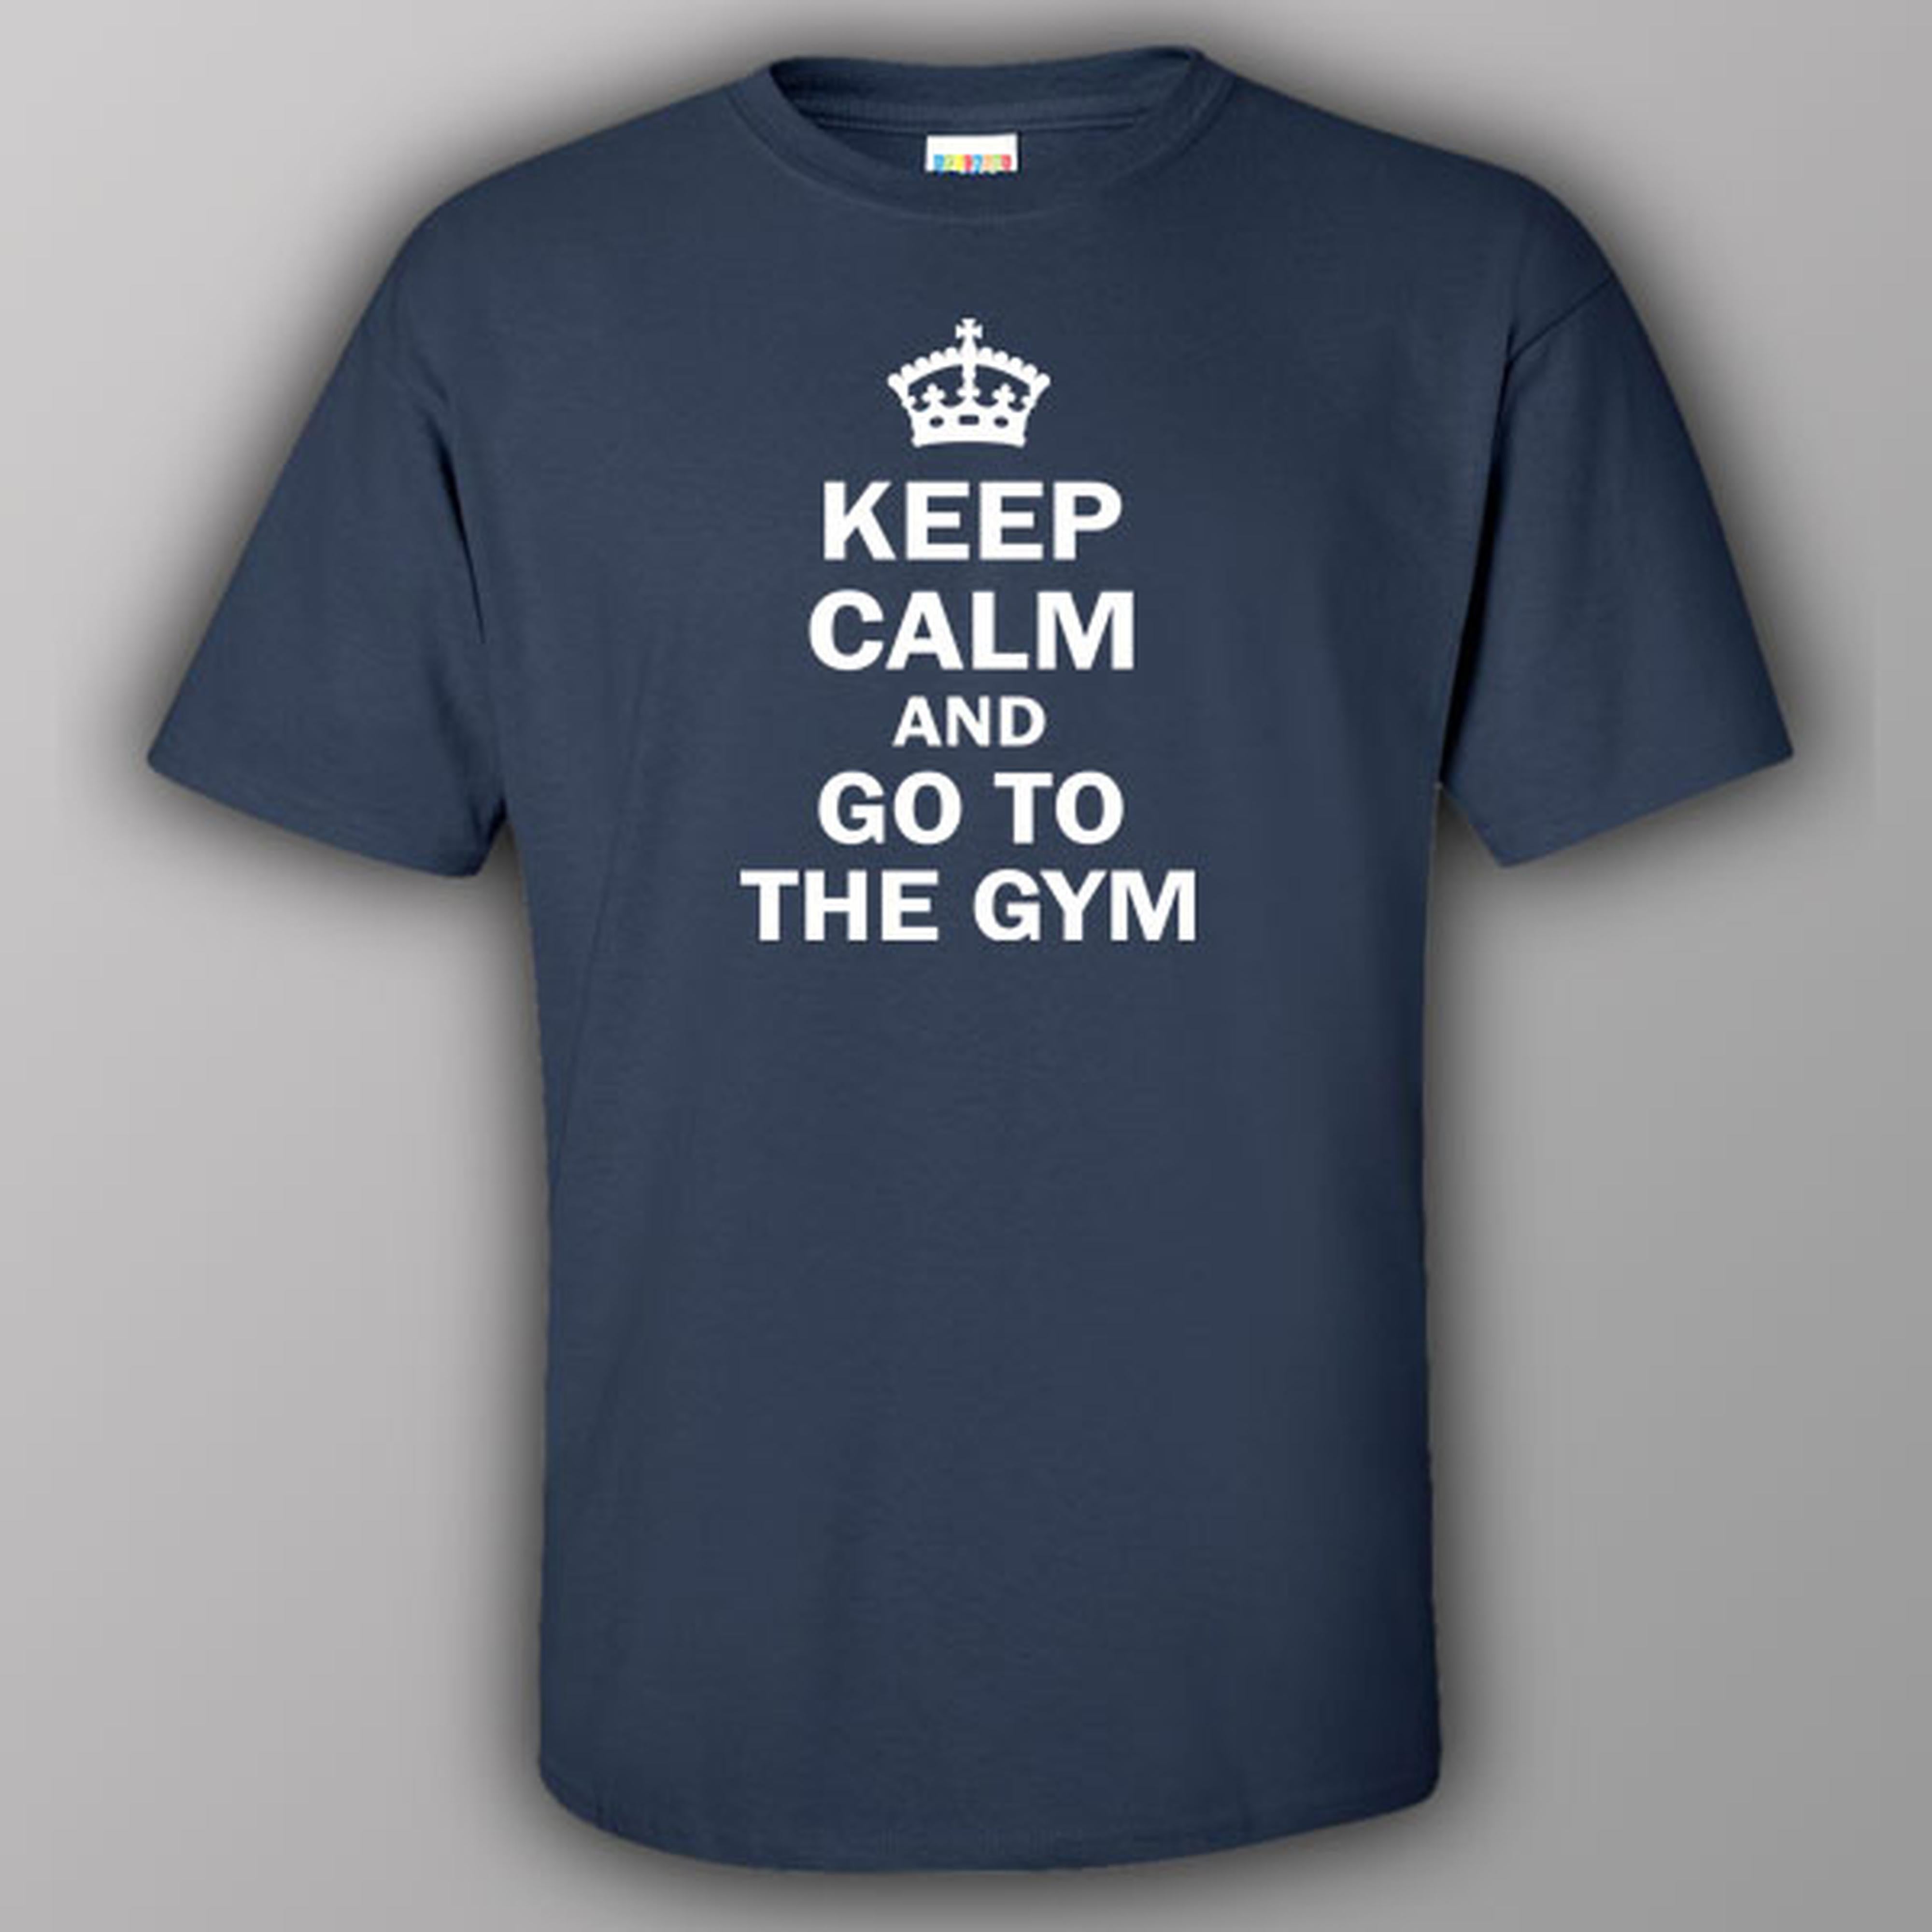 Keep calm and go to the gym - T-shirt